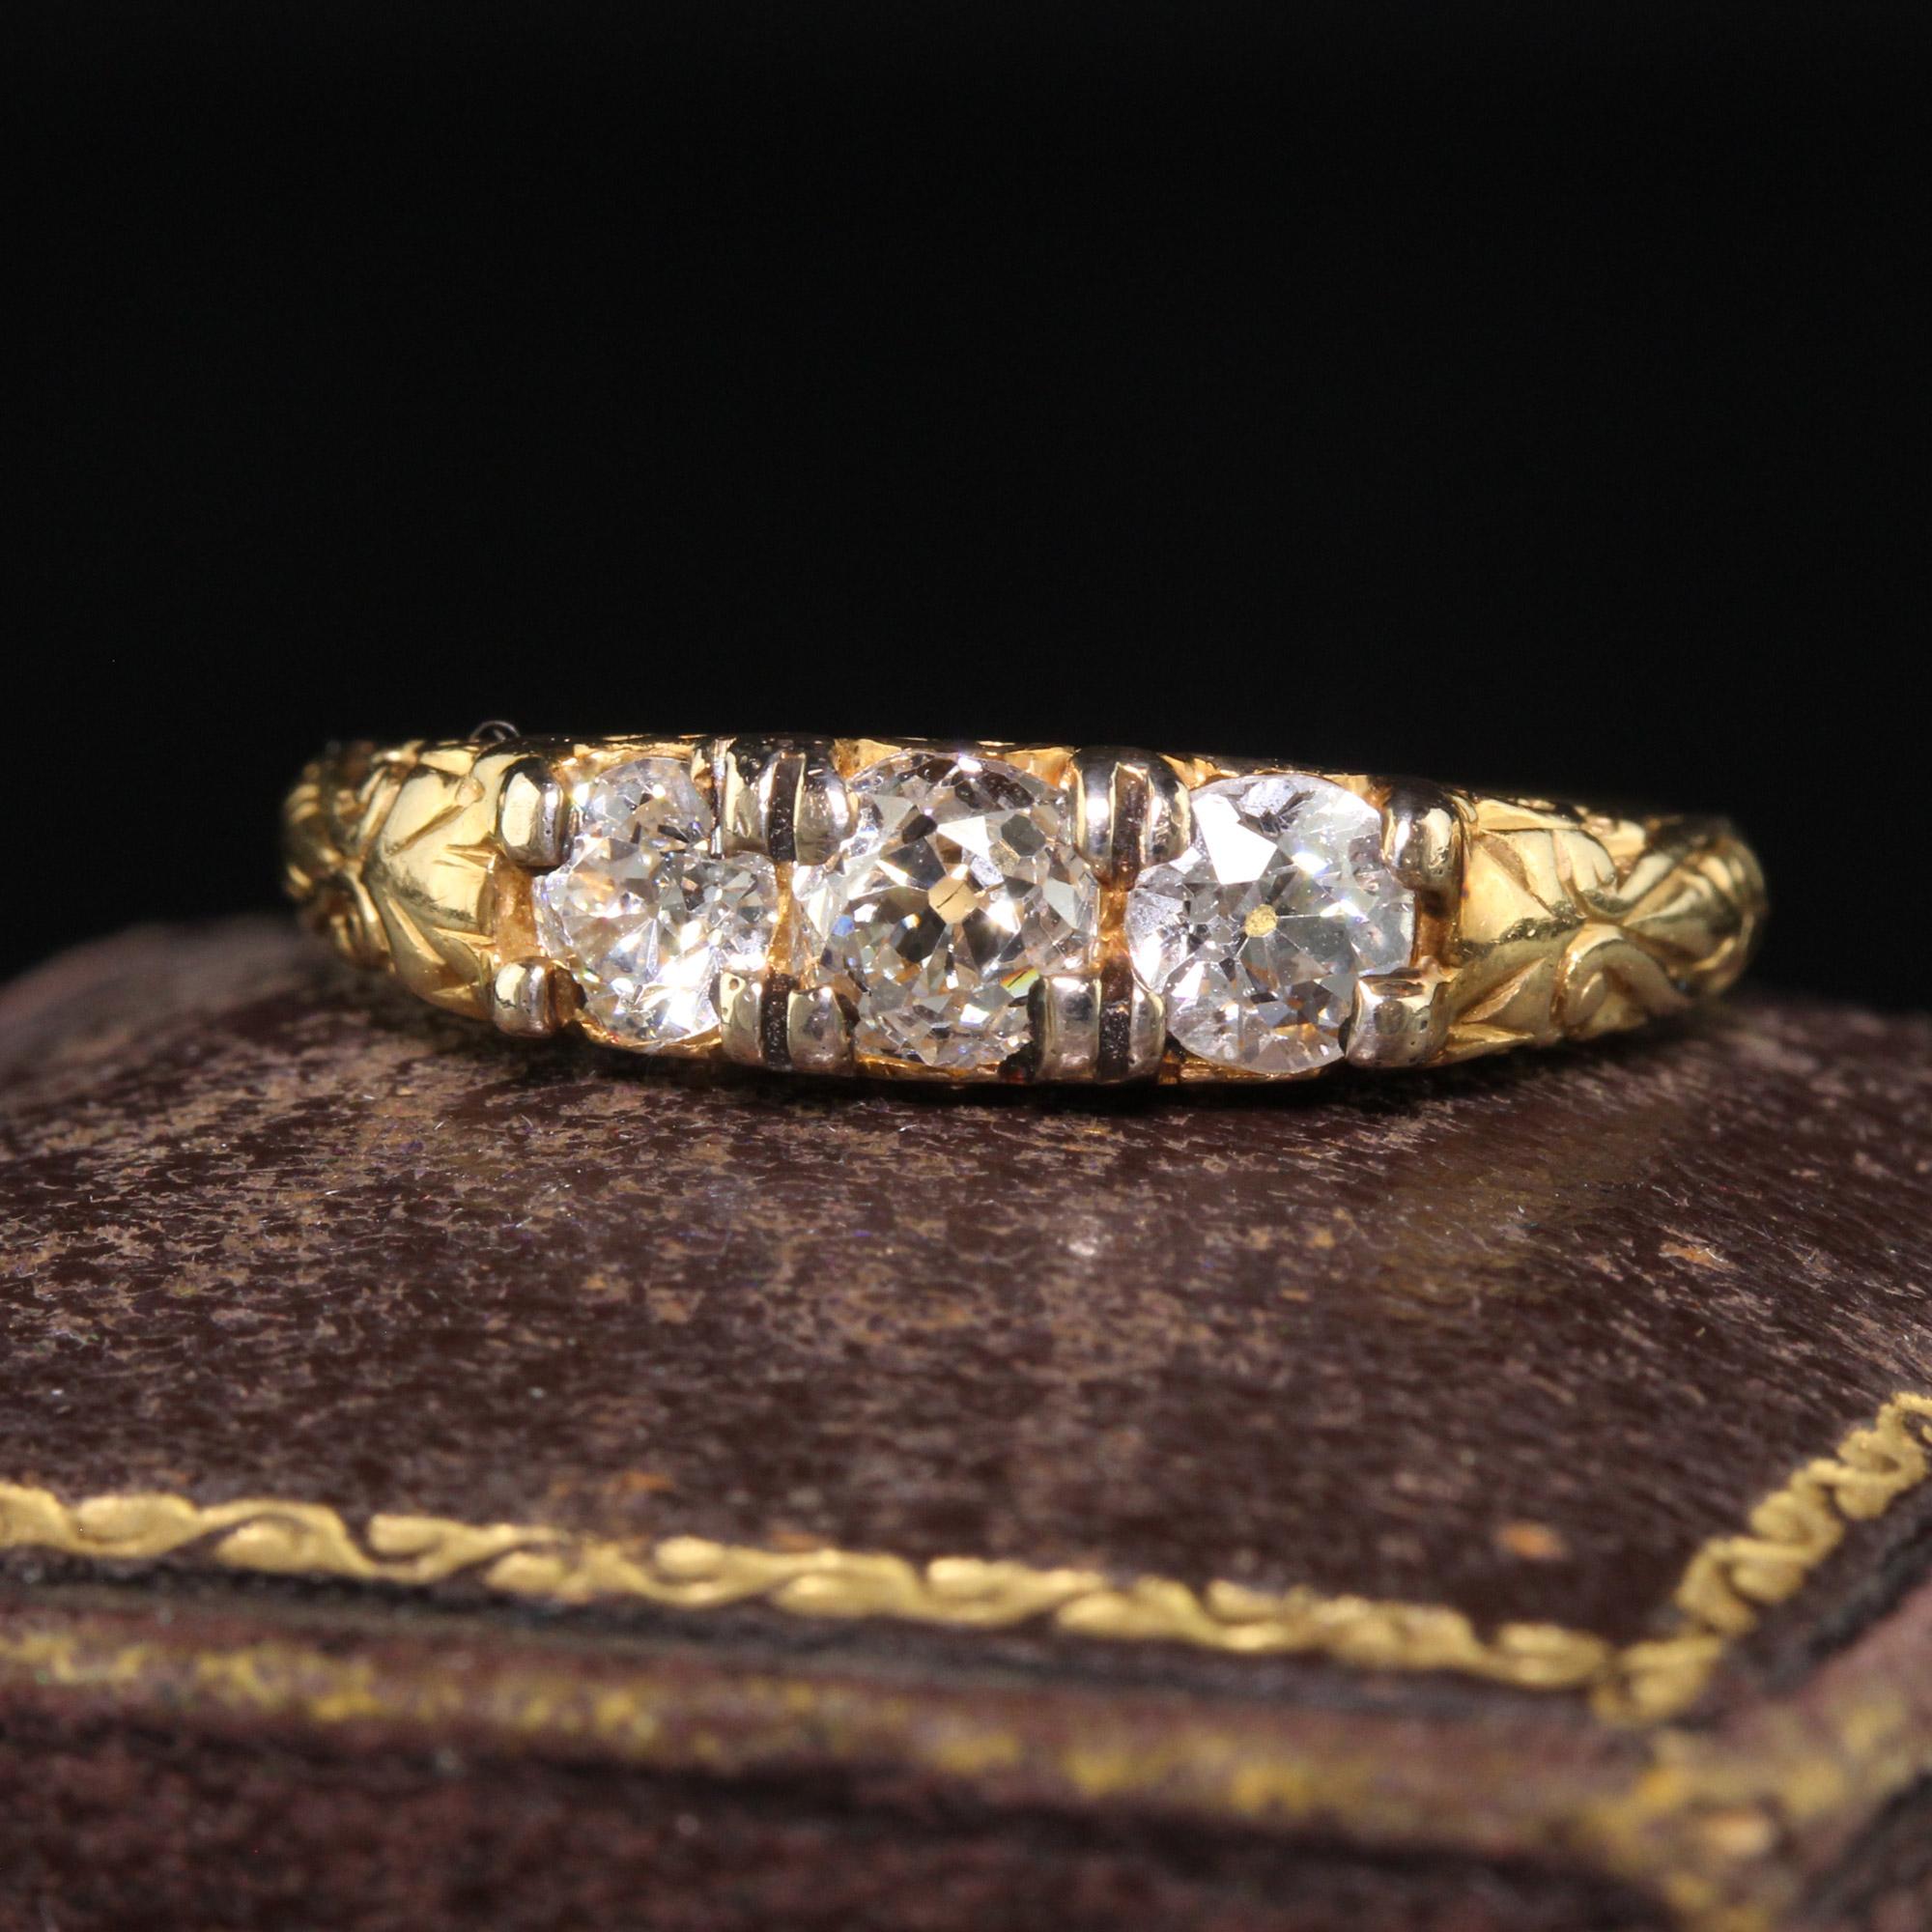 Beautiful Antique Victorian 18K Yellow Gold Old Mine Diamond Three Stone Wedding Band. This beautiful Victorian three diamond wedding band is crafted in 18k yellow gold. The center holds three chunky old mine cut diamonds that have a beautiful